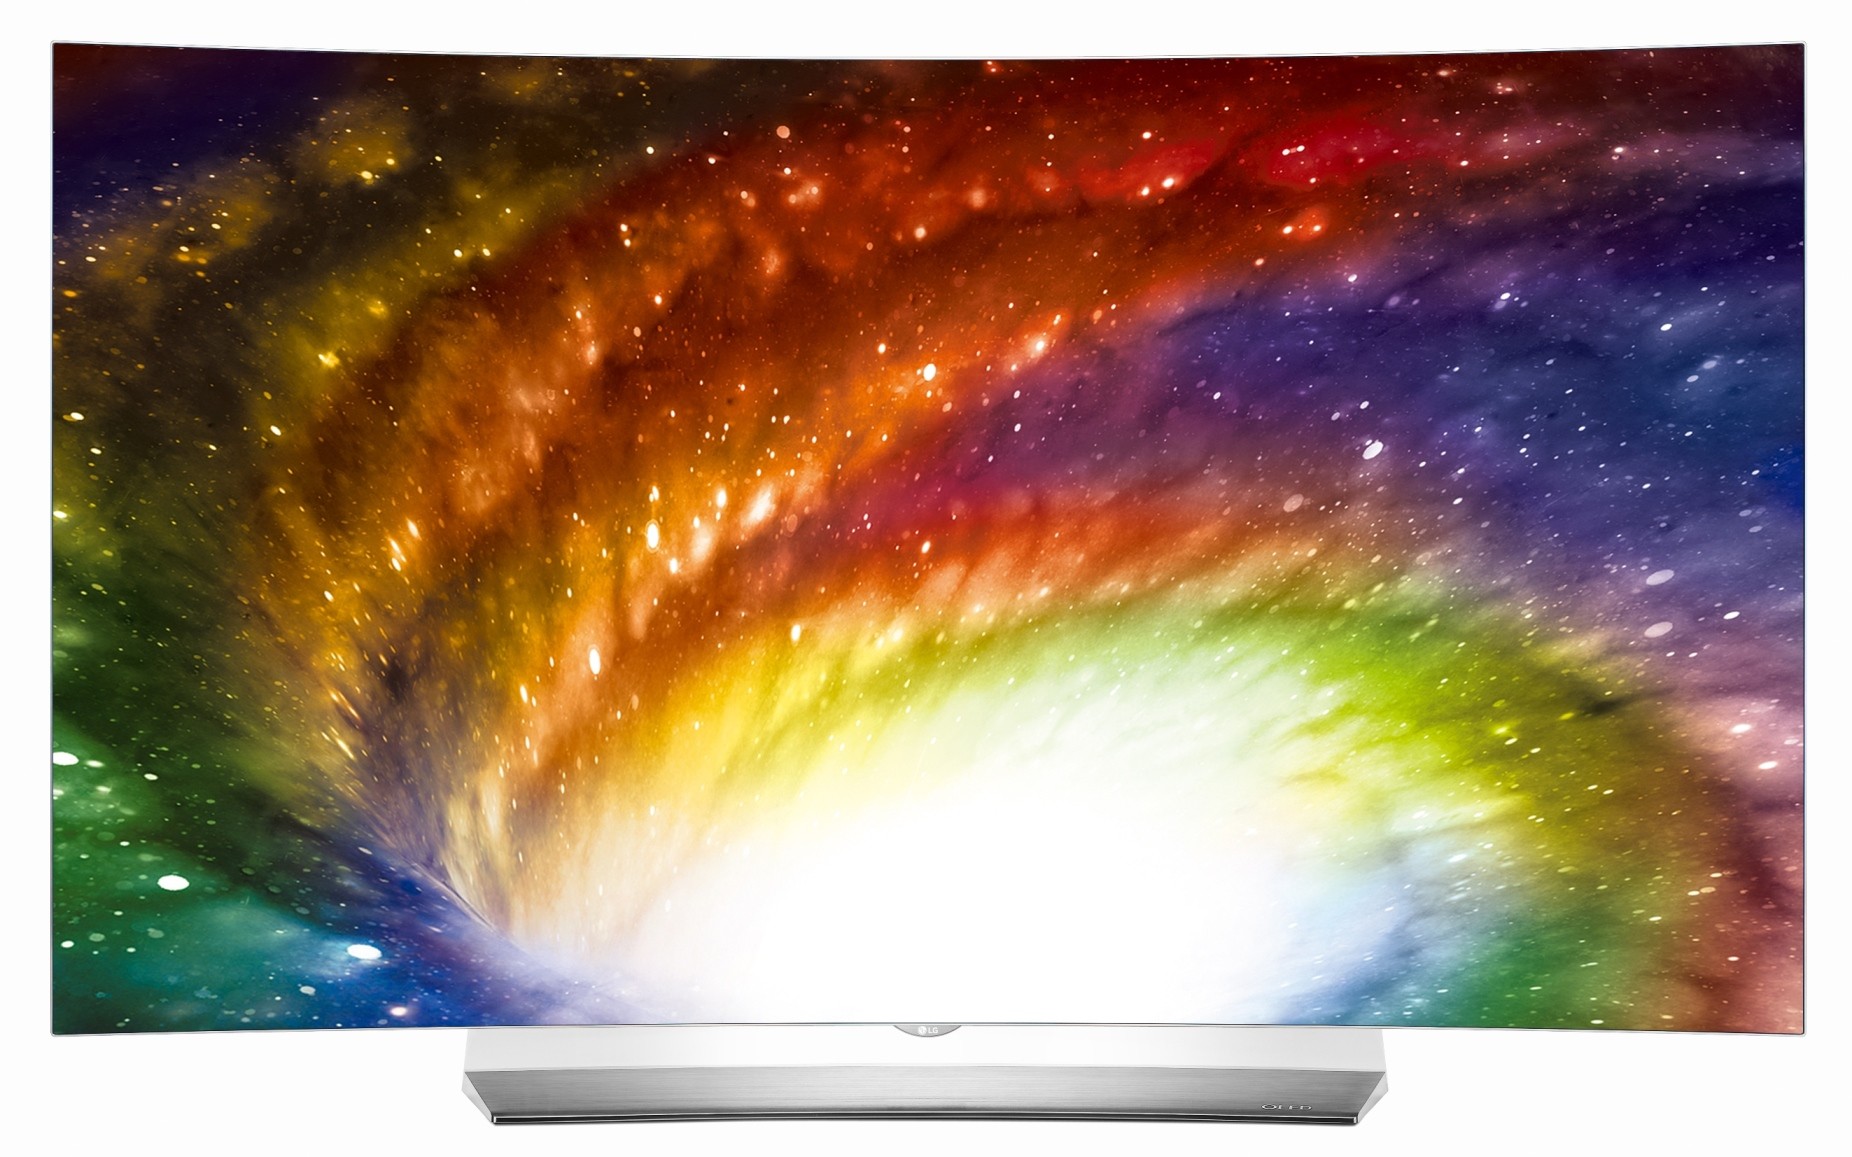 Front view of one of LG’s TVs, model OLED55C6K, displaying colorful imagery to commemorate the new partnership between LG and Bang & Olufsen